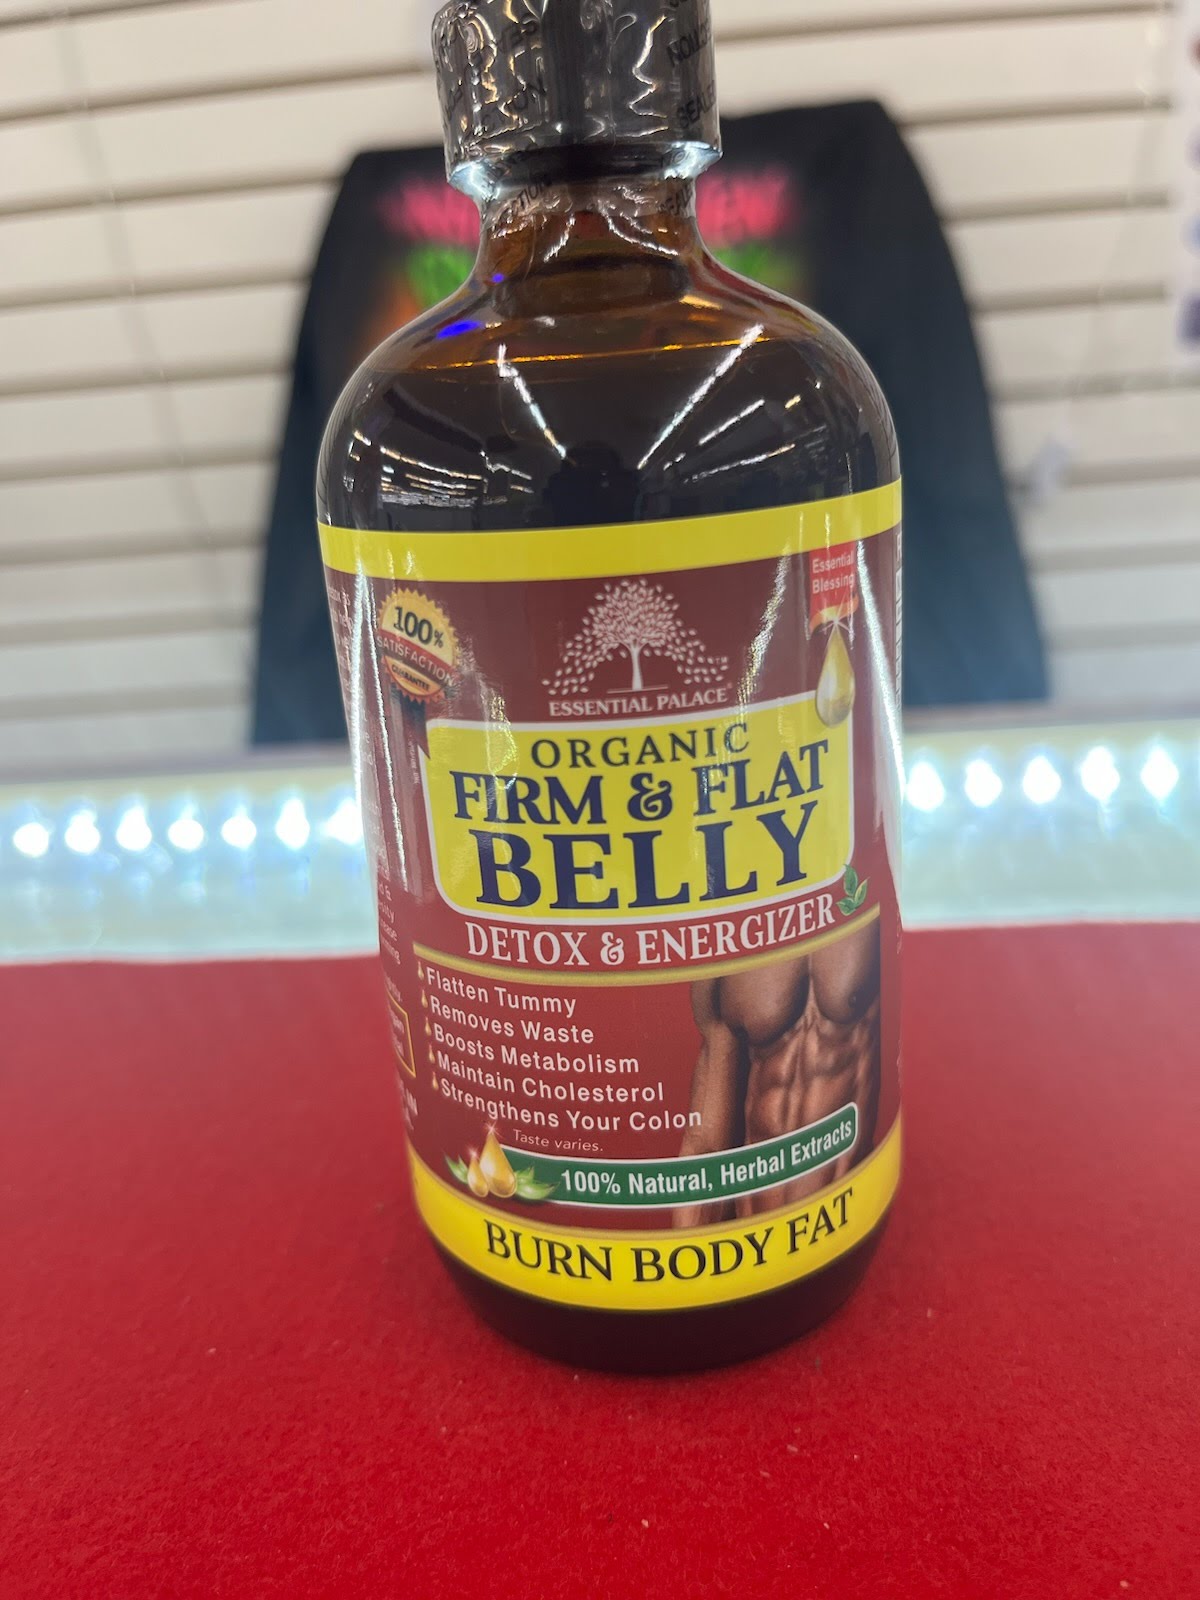 A bottle of organic firm and flat belly